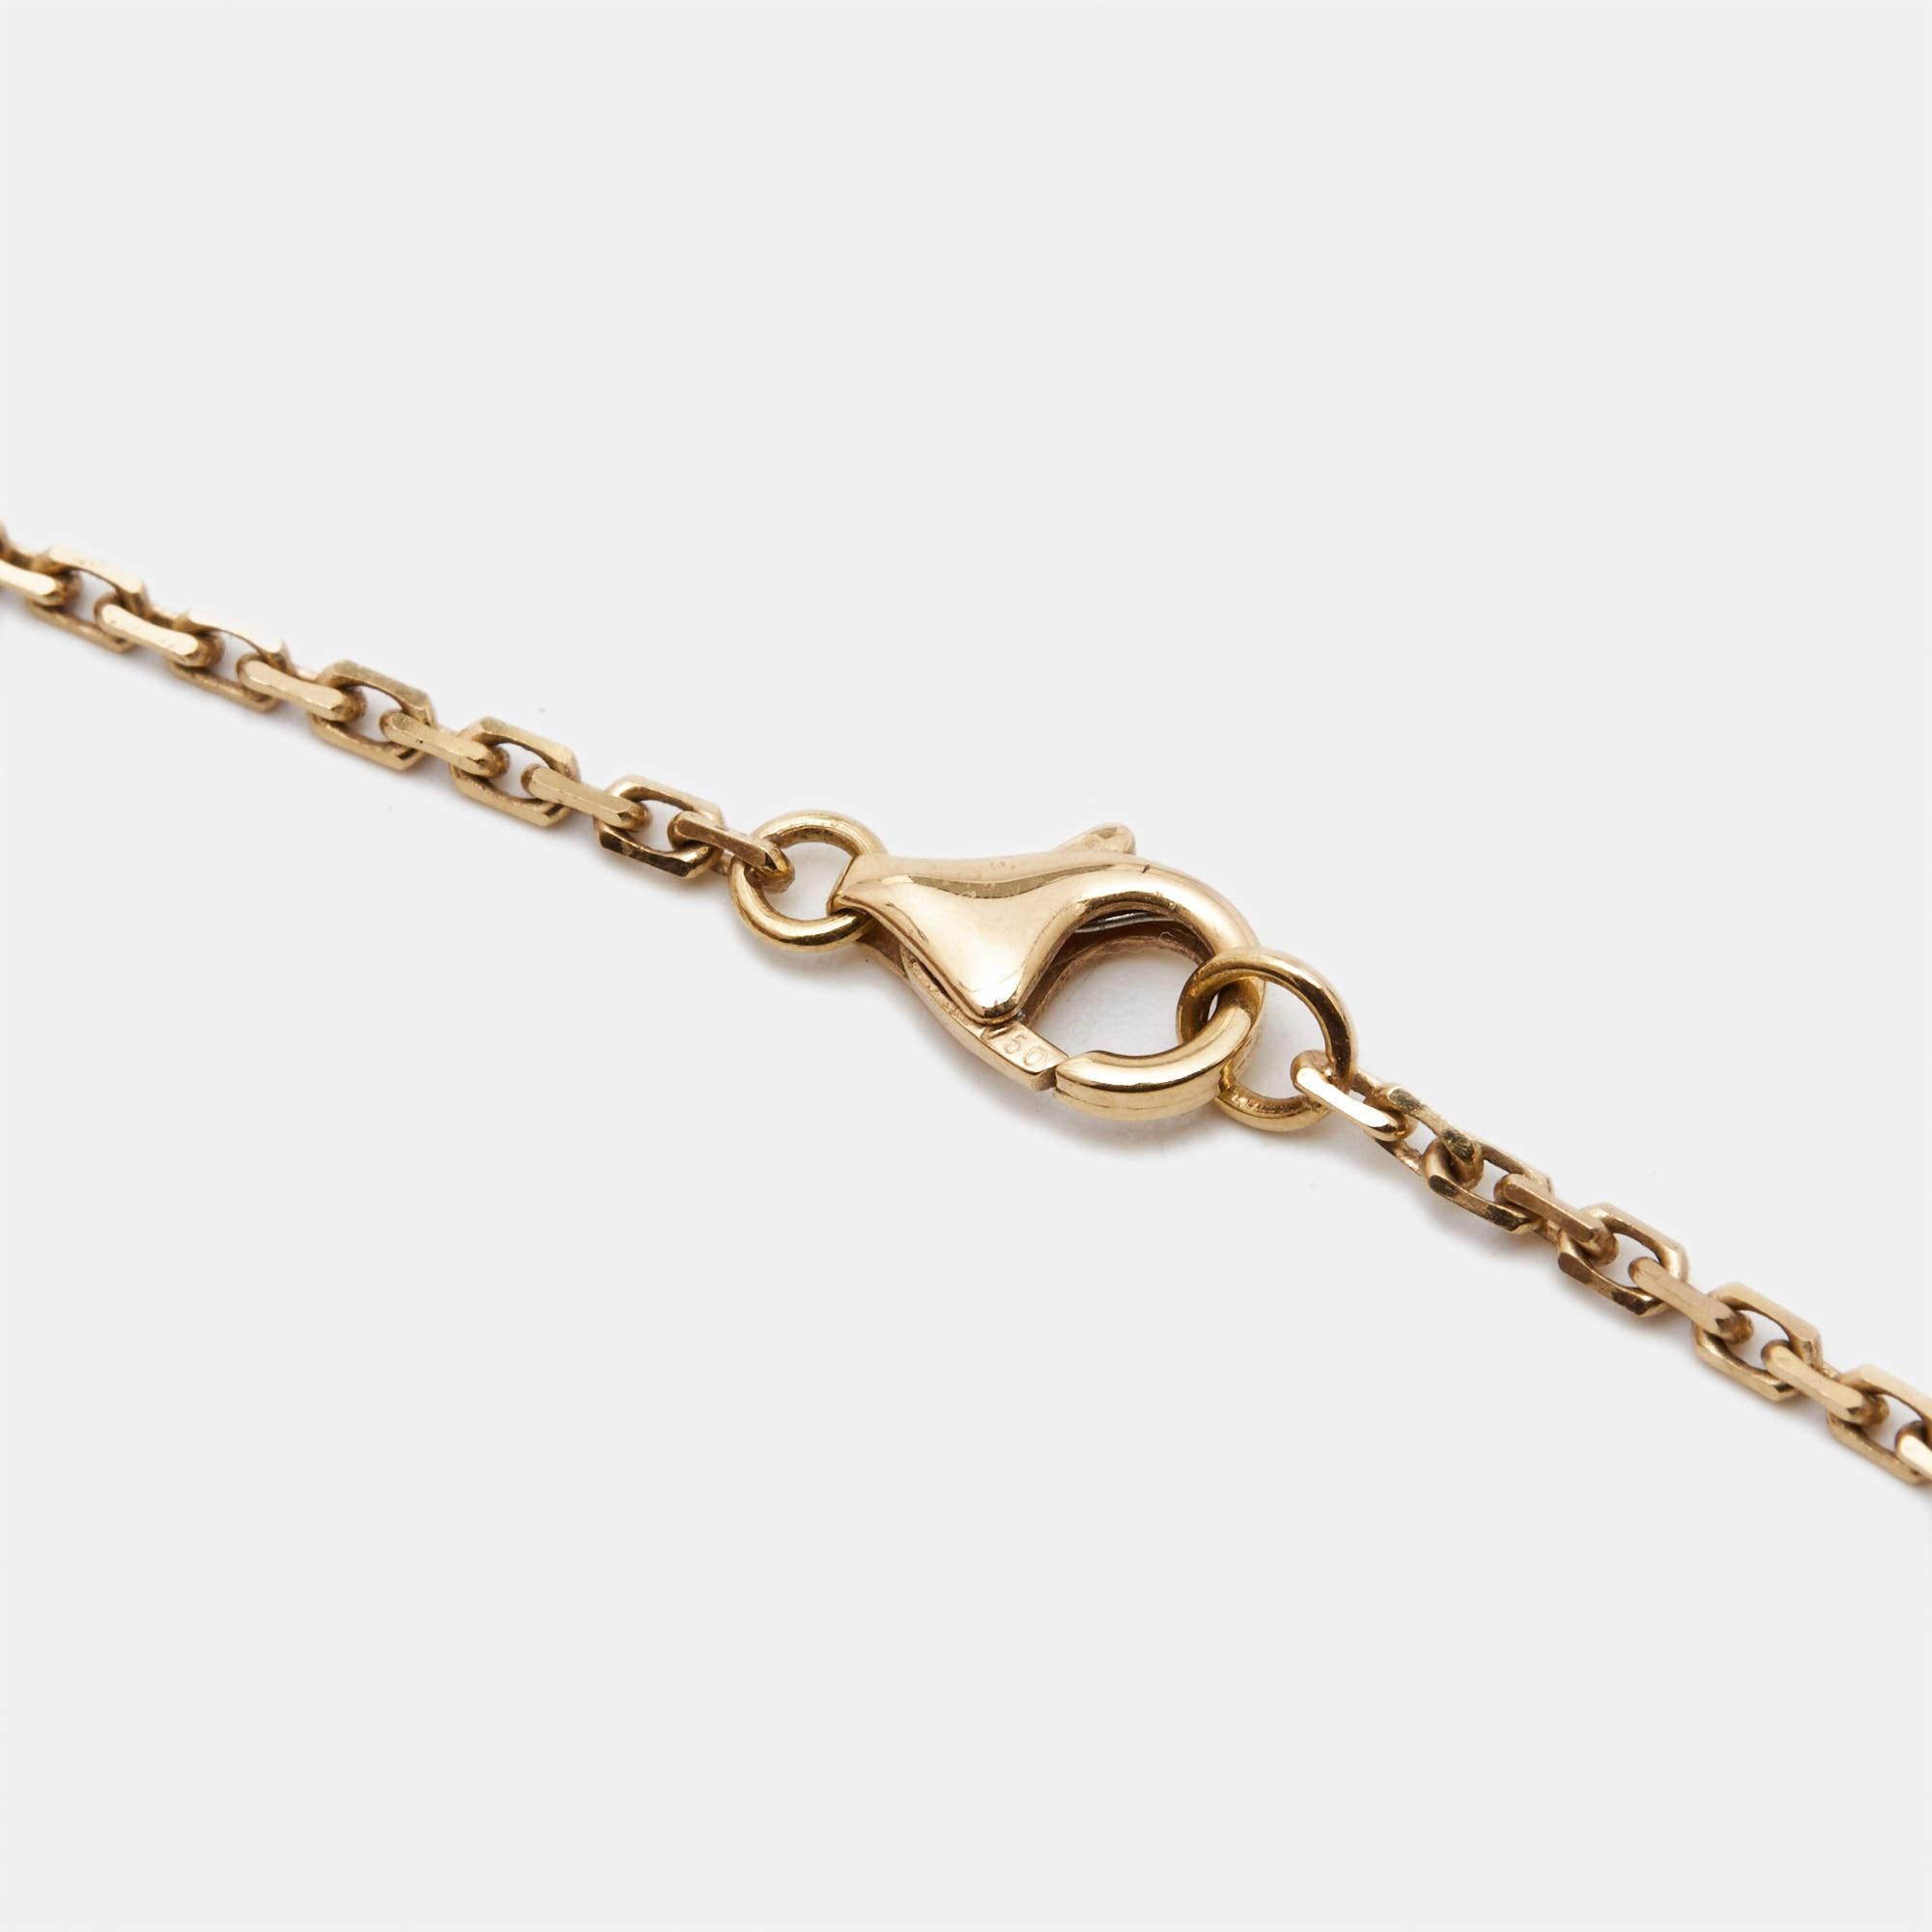 The Cartier Love necklace is an exquisite masterpiece, seamlessly blending luxury and romance. Crafted in lustrous 18k rose gold, its iconic Love motif is adorned with dazzling diamonds, adding a touch of brilliance. The elegant design symbolizes